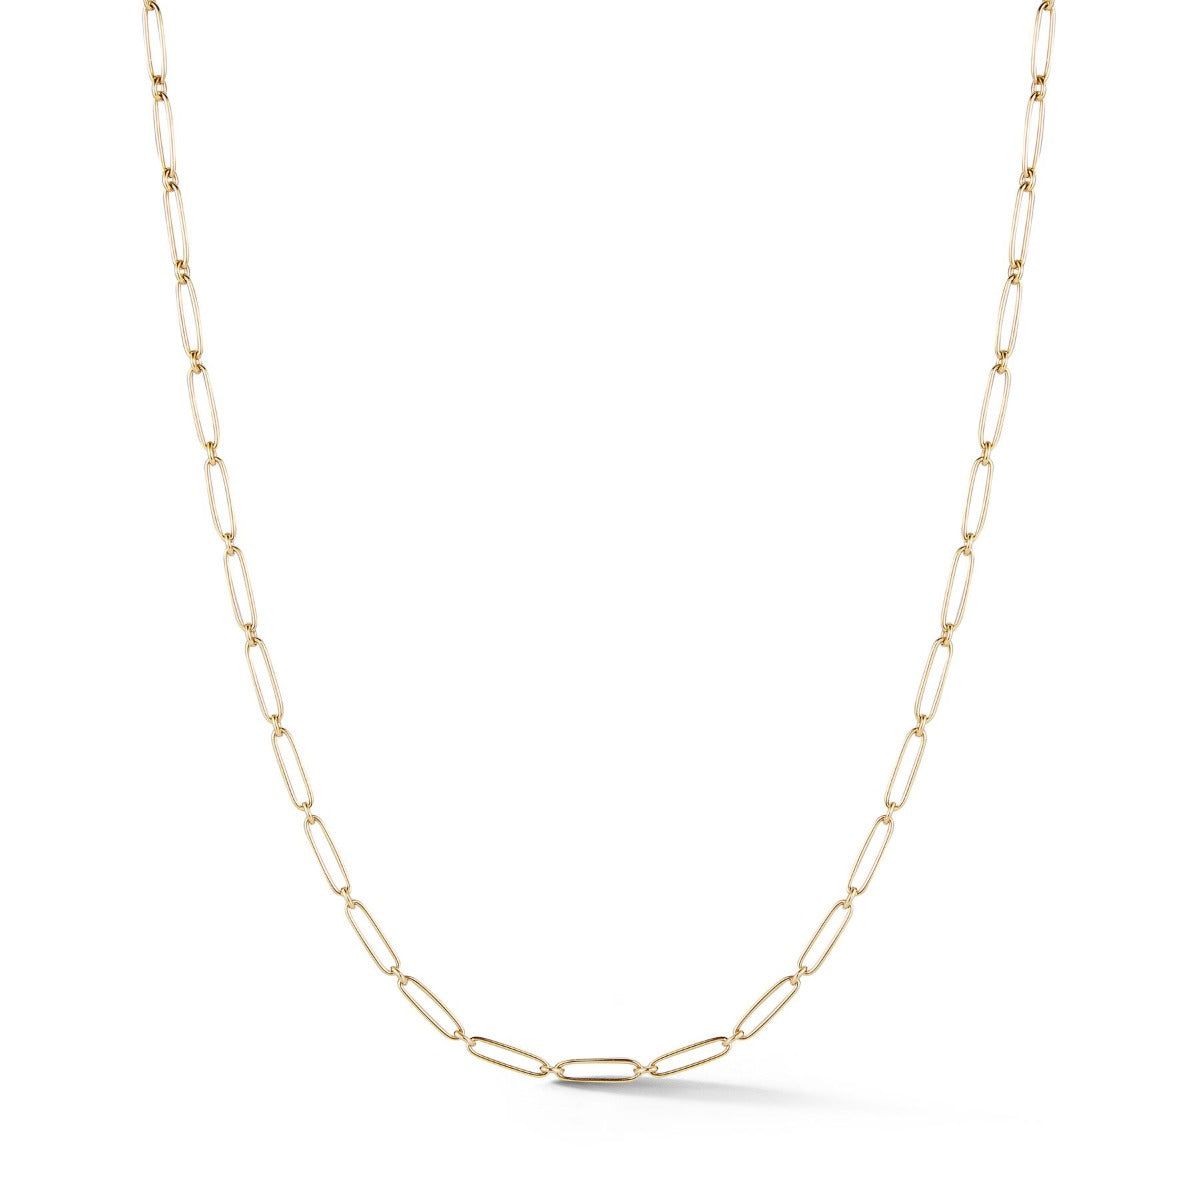 Storrow 14K Gold Elongated Link Grover Chain